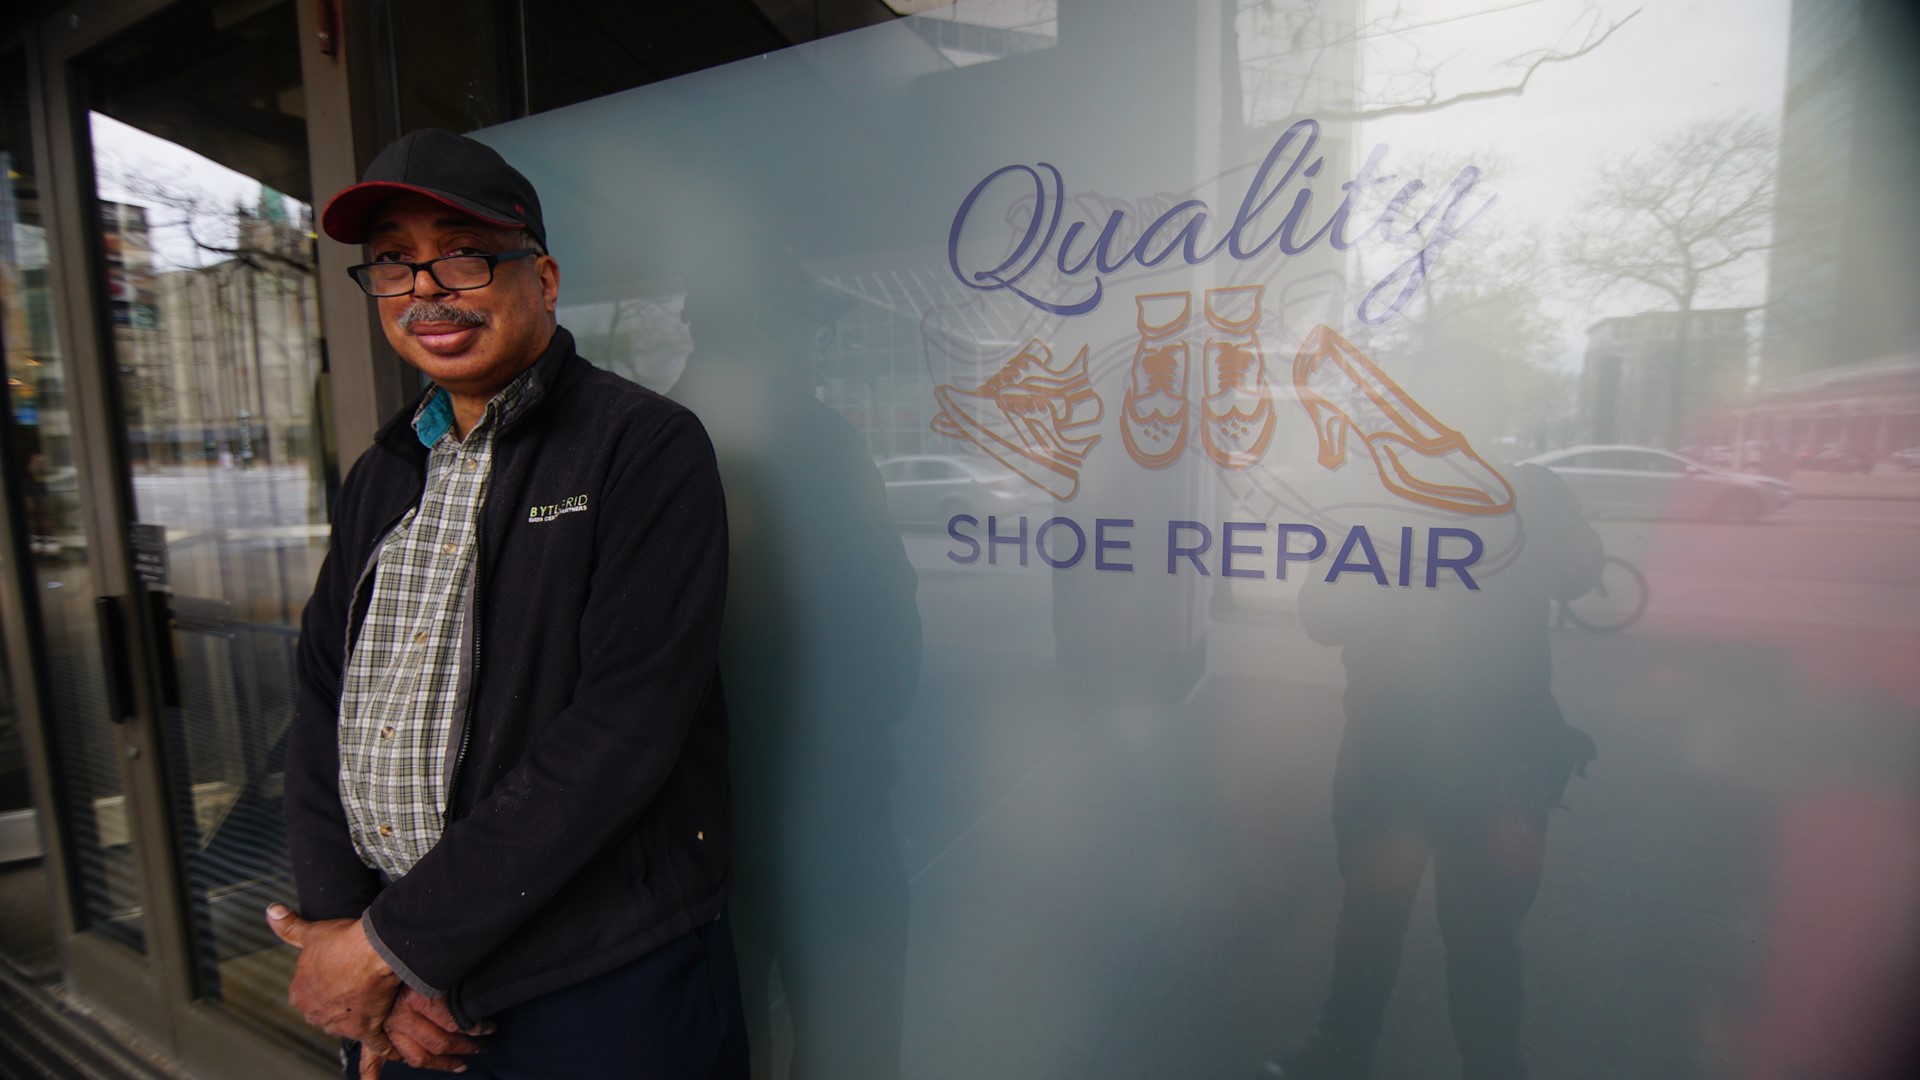 Hardworking Cleveland is a WKYC digital web-series about Clevelanders hard at work. This story is about Donald Kilgo, shoe-smith and owner of Quality Shoe Repair in Cleveland OH